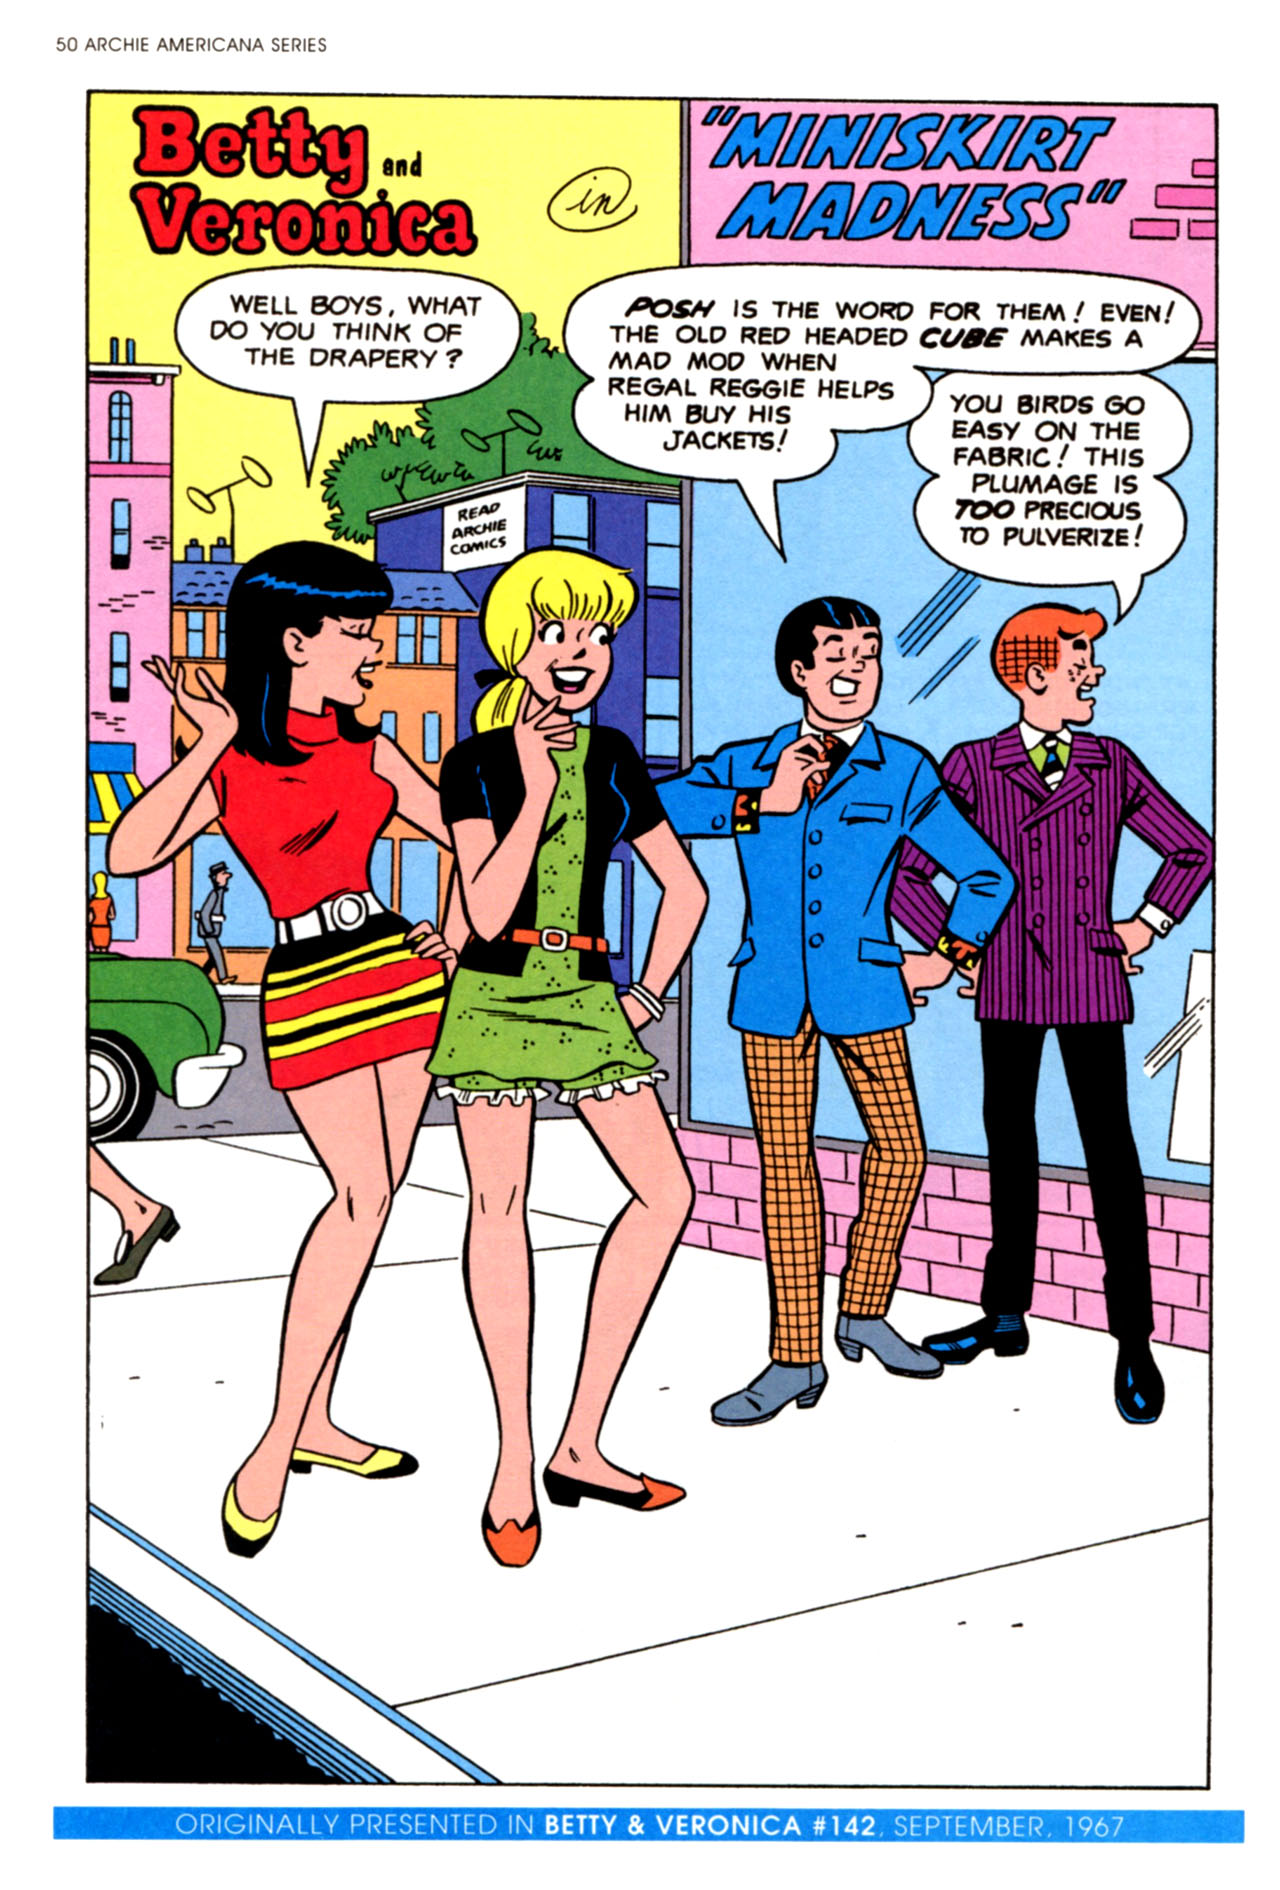 Read online Archie Americana Series comic -  Issue # TPB 3 - 52